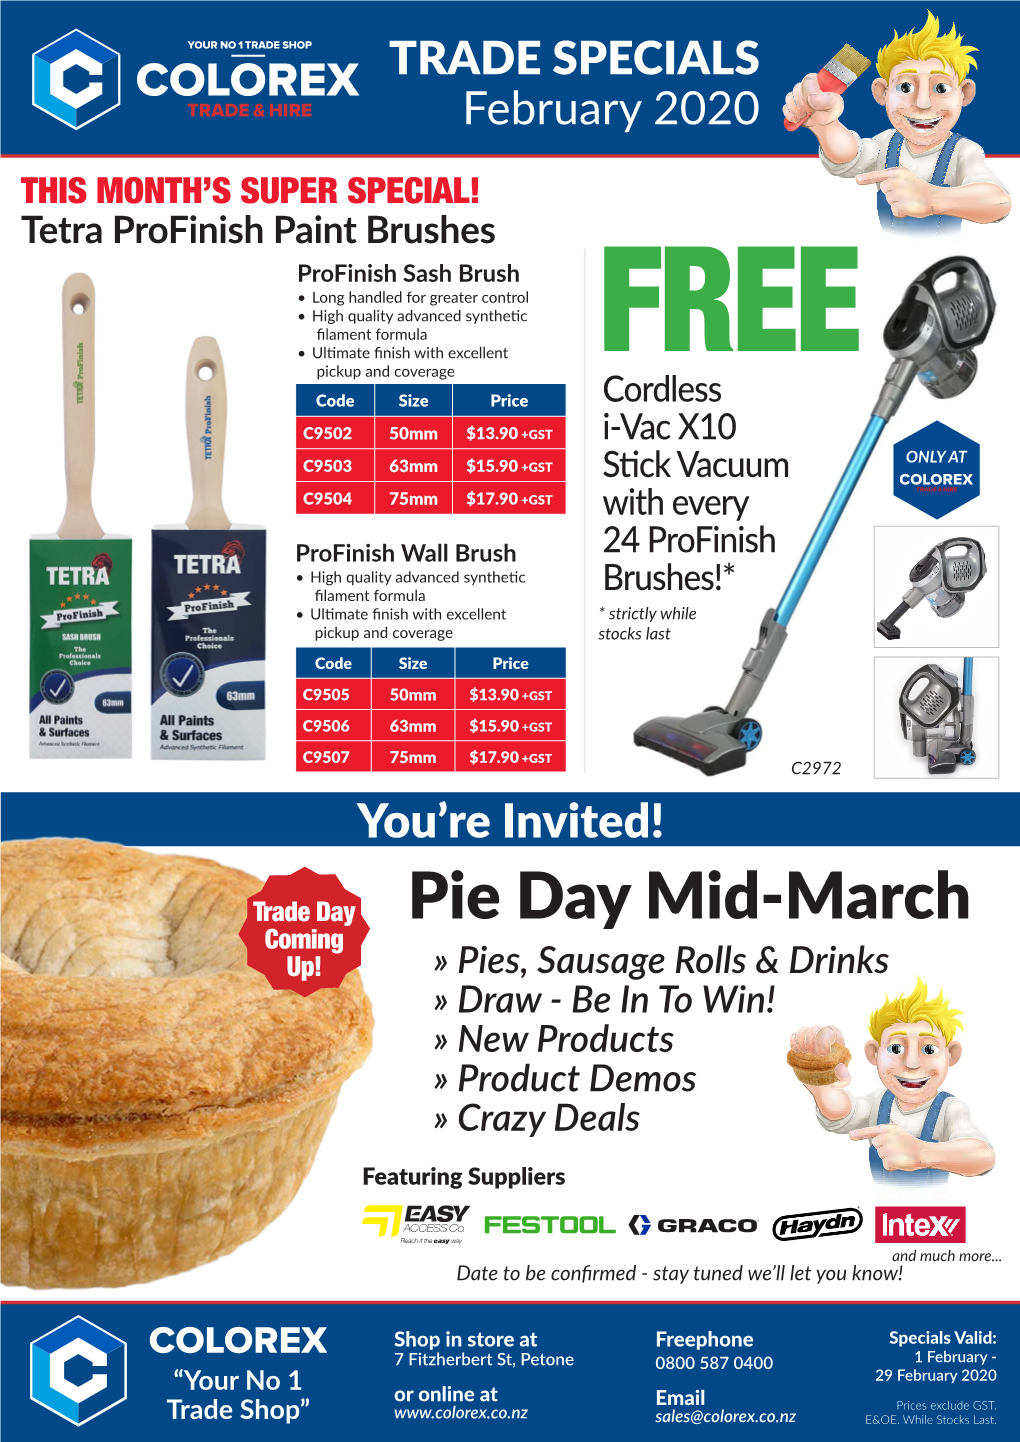 Pie Day Mid-March Coming Up! » Pies, Sausage Rolls & Drinks » Draw - Be in to Win! » New Products » Product Demos » Crazy Deals